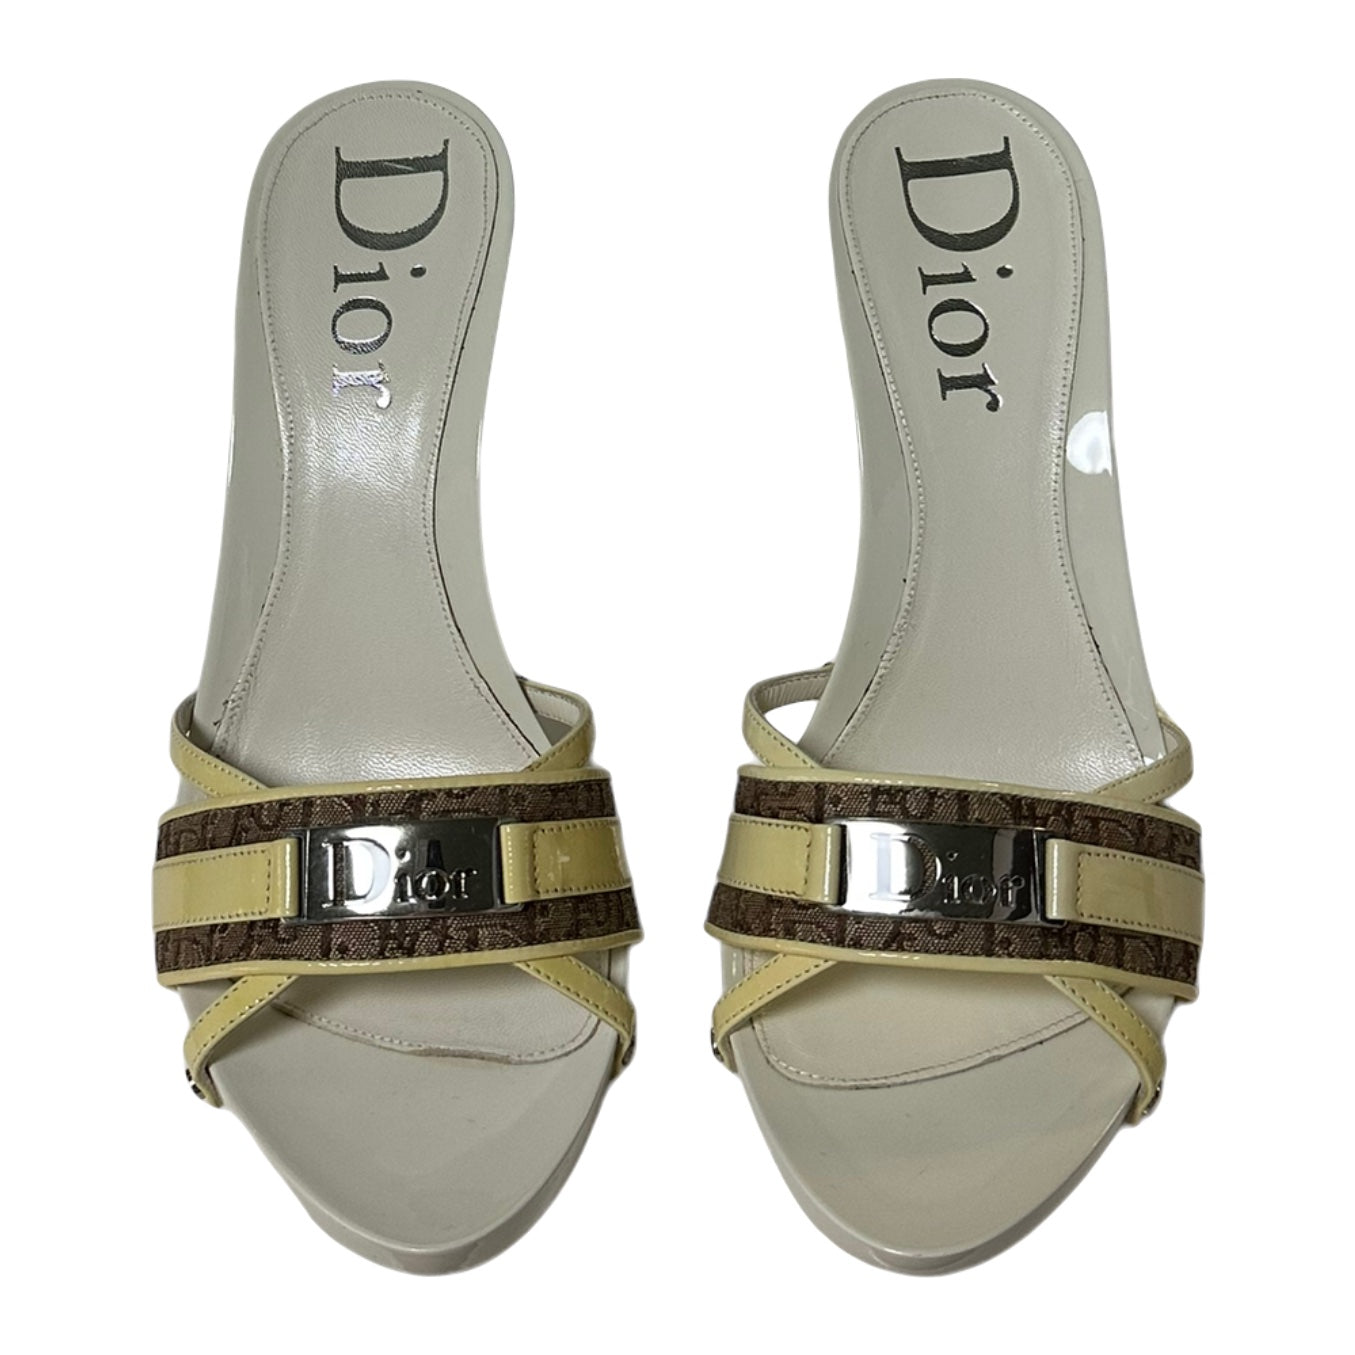 CHRISTIAN DIOR Spring Summer 2005 Diorissimo Street Chic Trotter Sandals